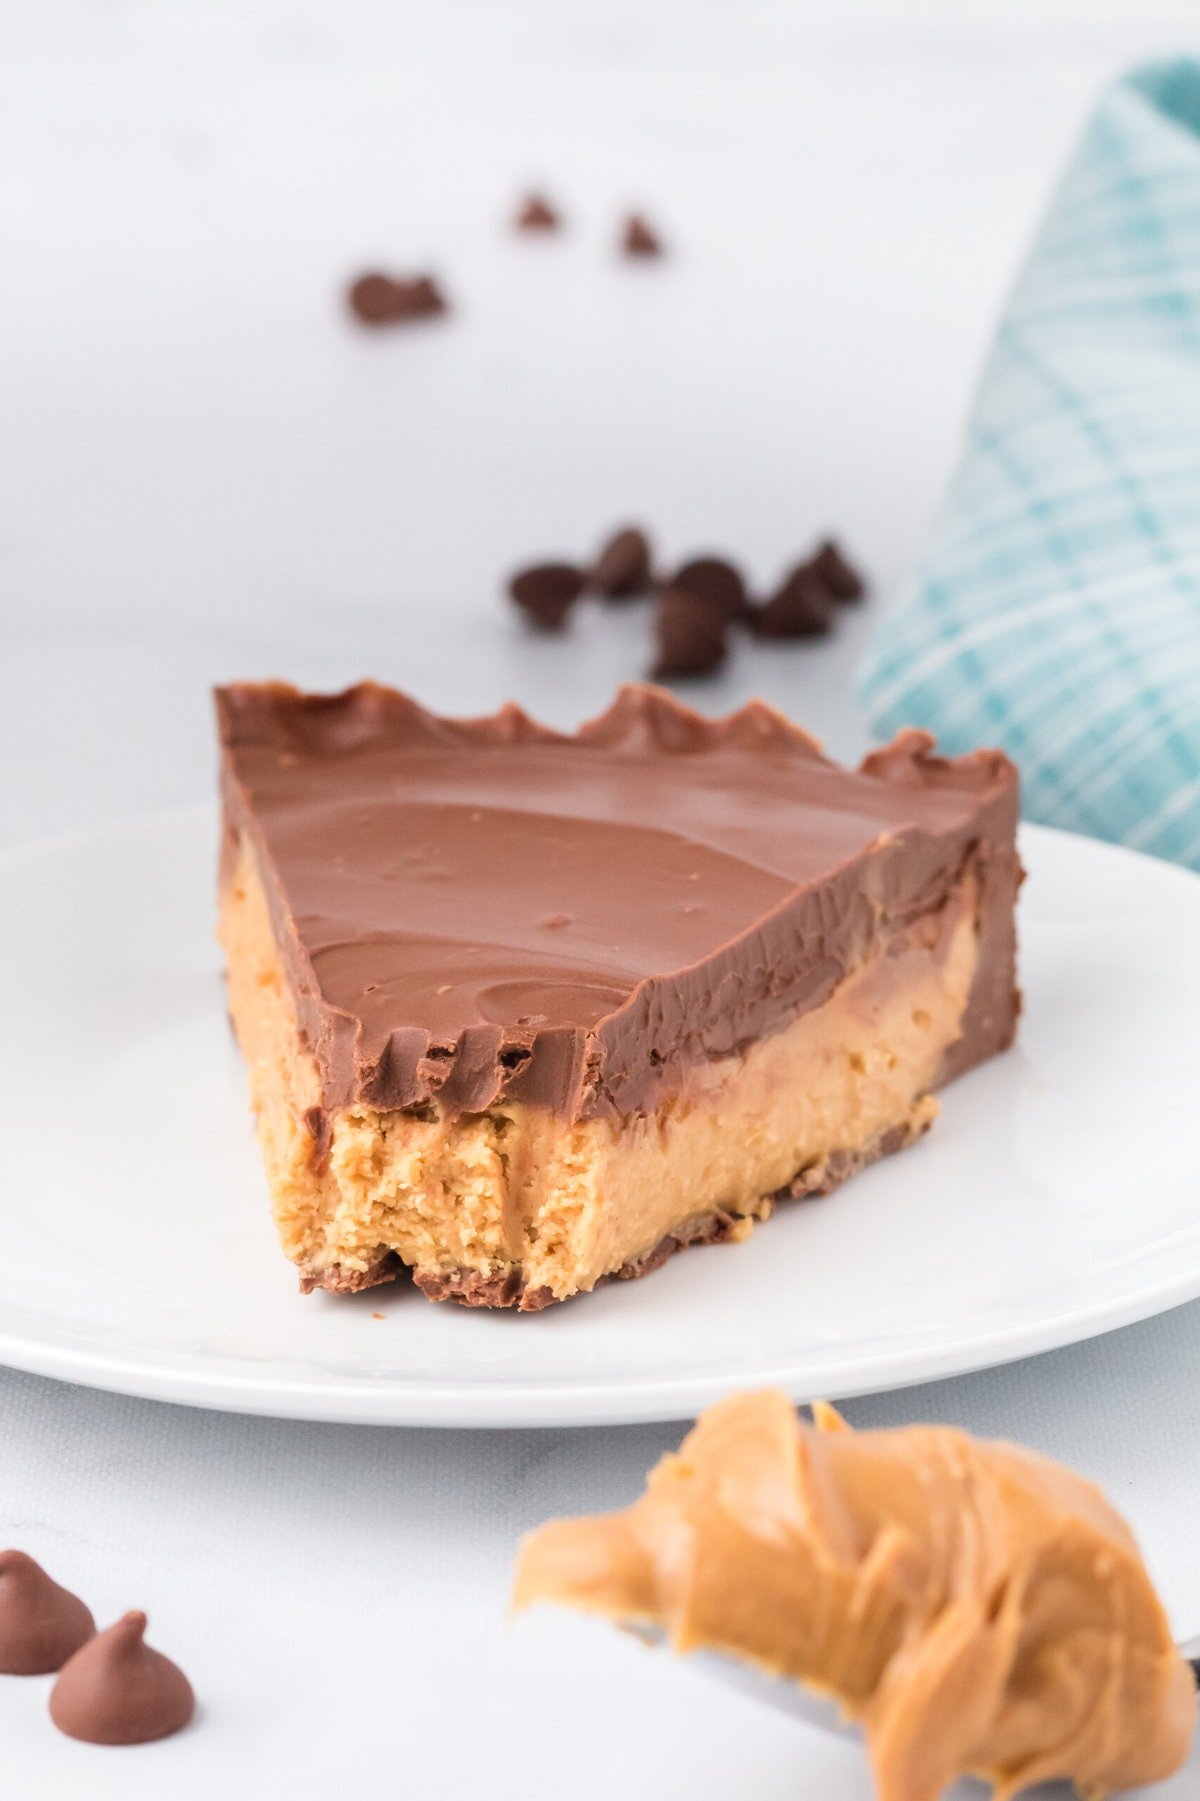 Reese's Peanut Butter Cup Pie with a bite taken out.